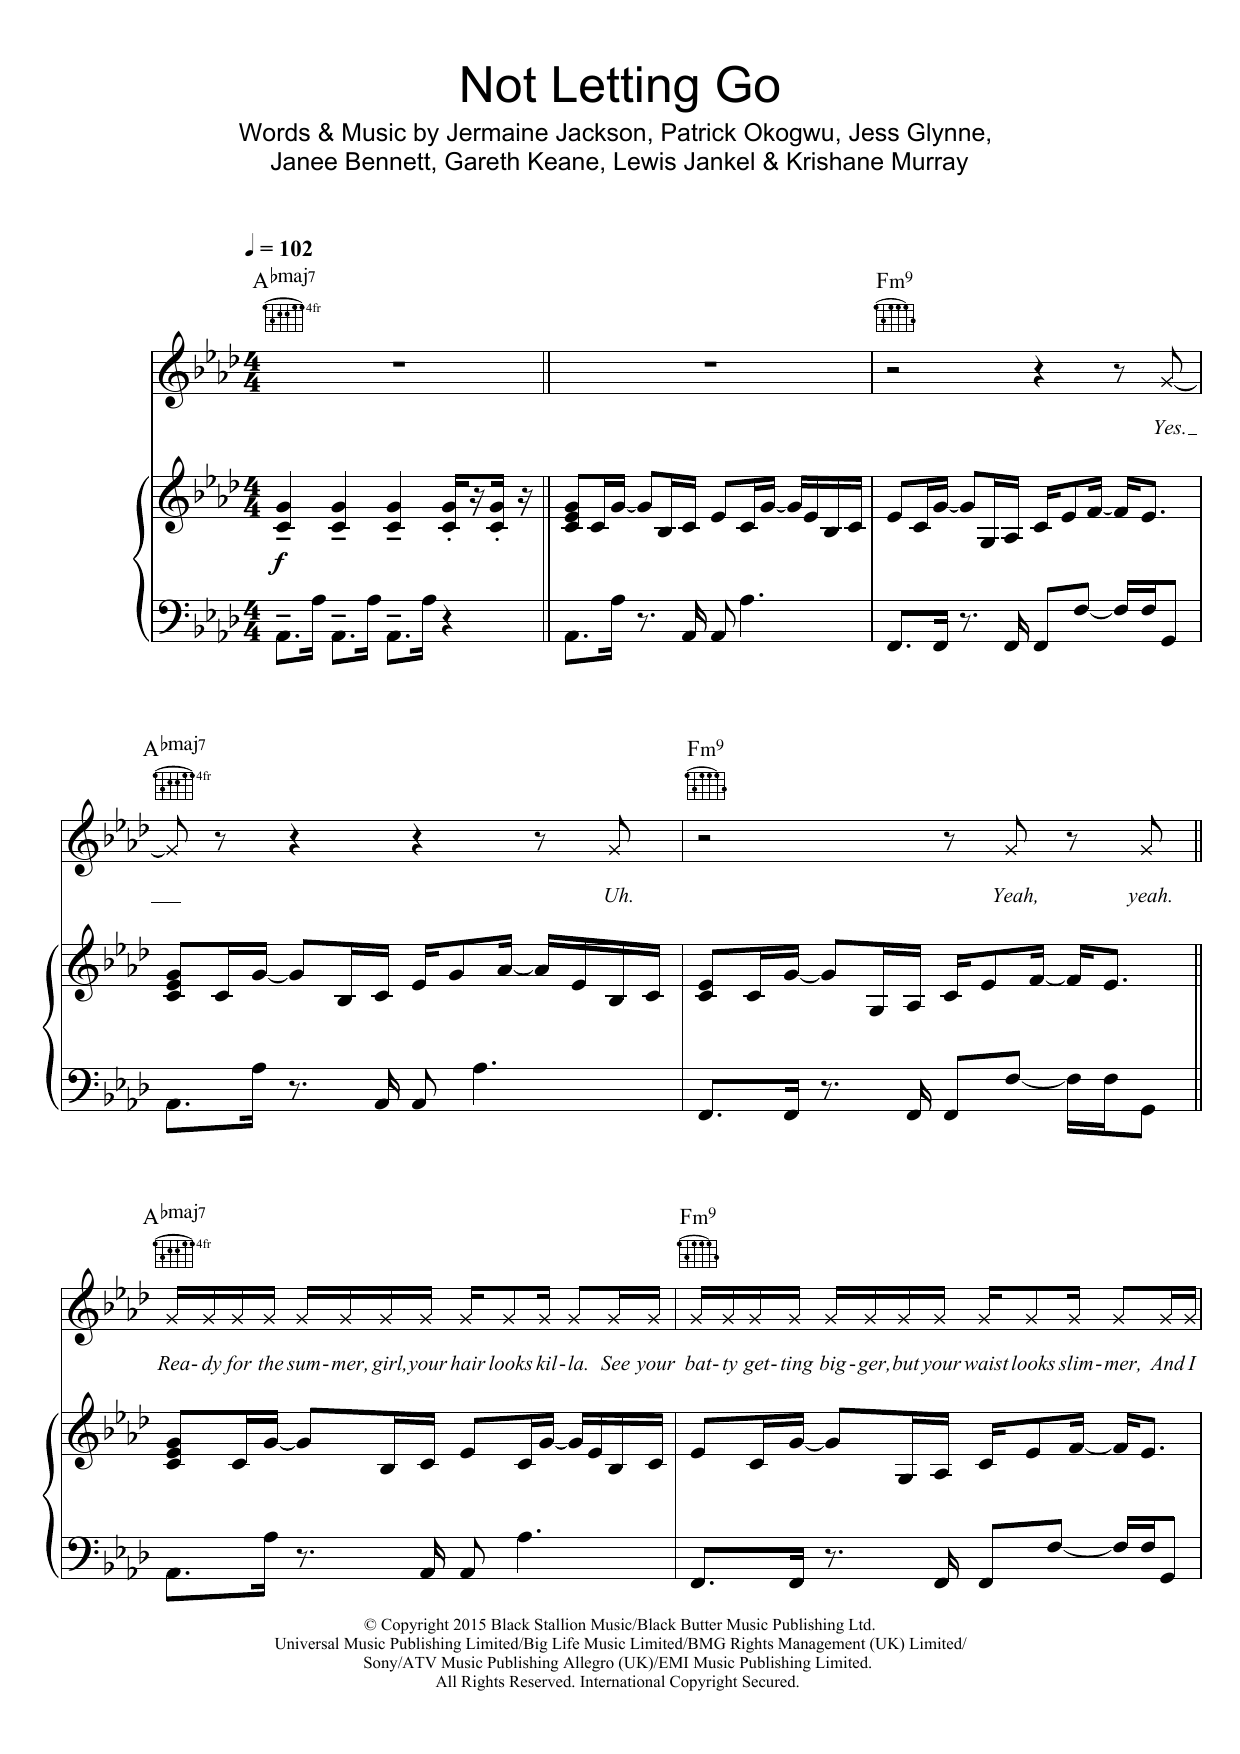 Download Tinie Tempah Not Letting Go (feat. Jess Glynne) Sheet Music